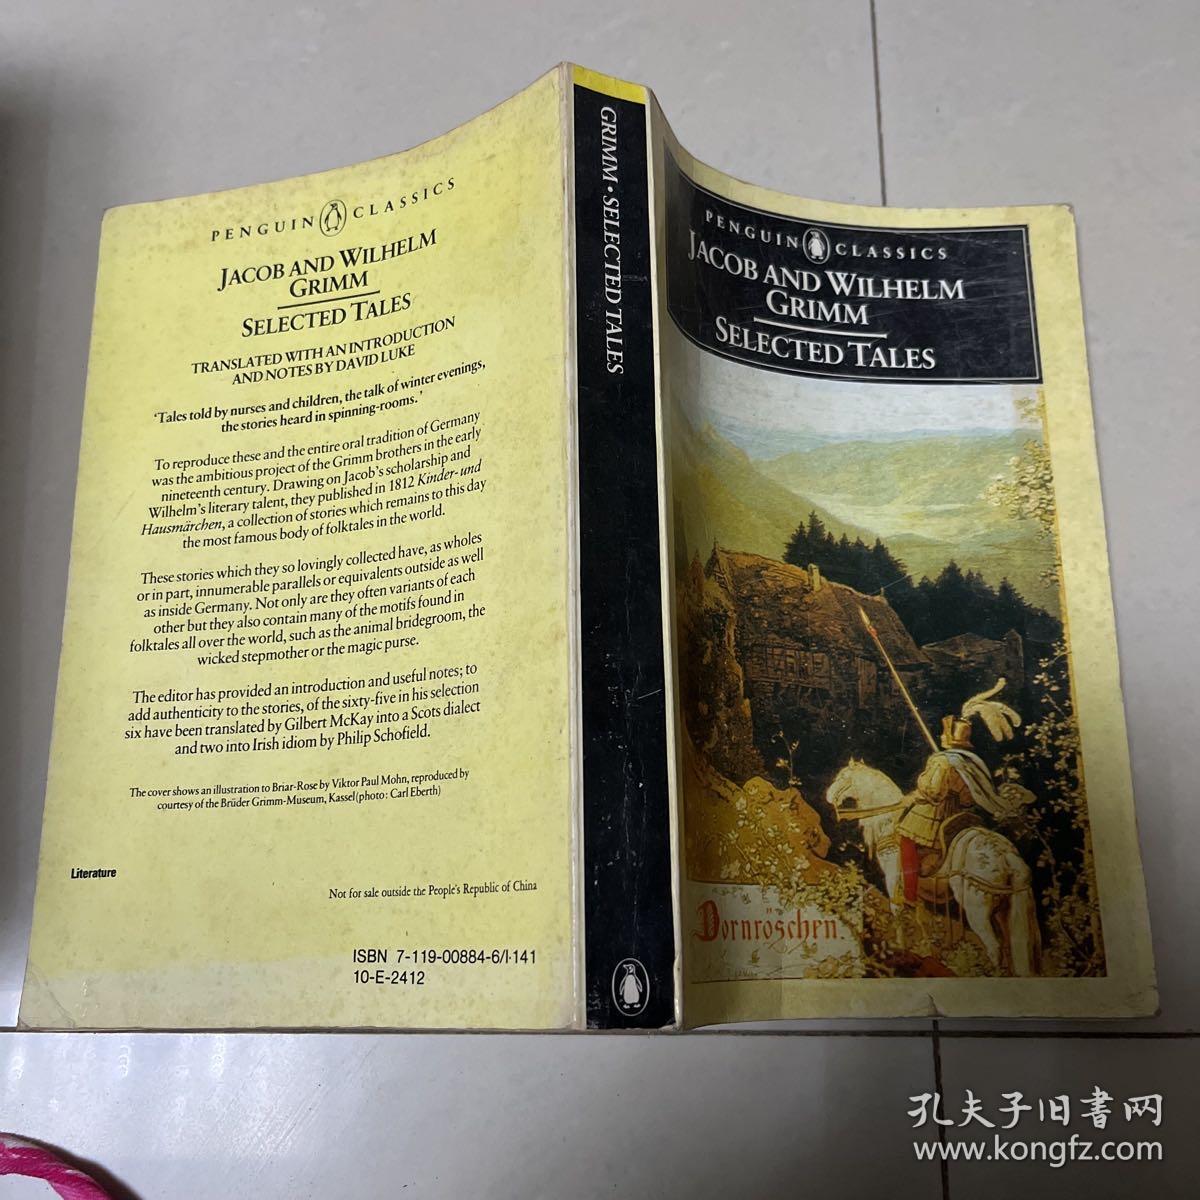 JACOB AND WILHELM
GRIMM
SELECTED TALES格林童话精选